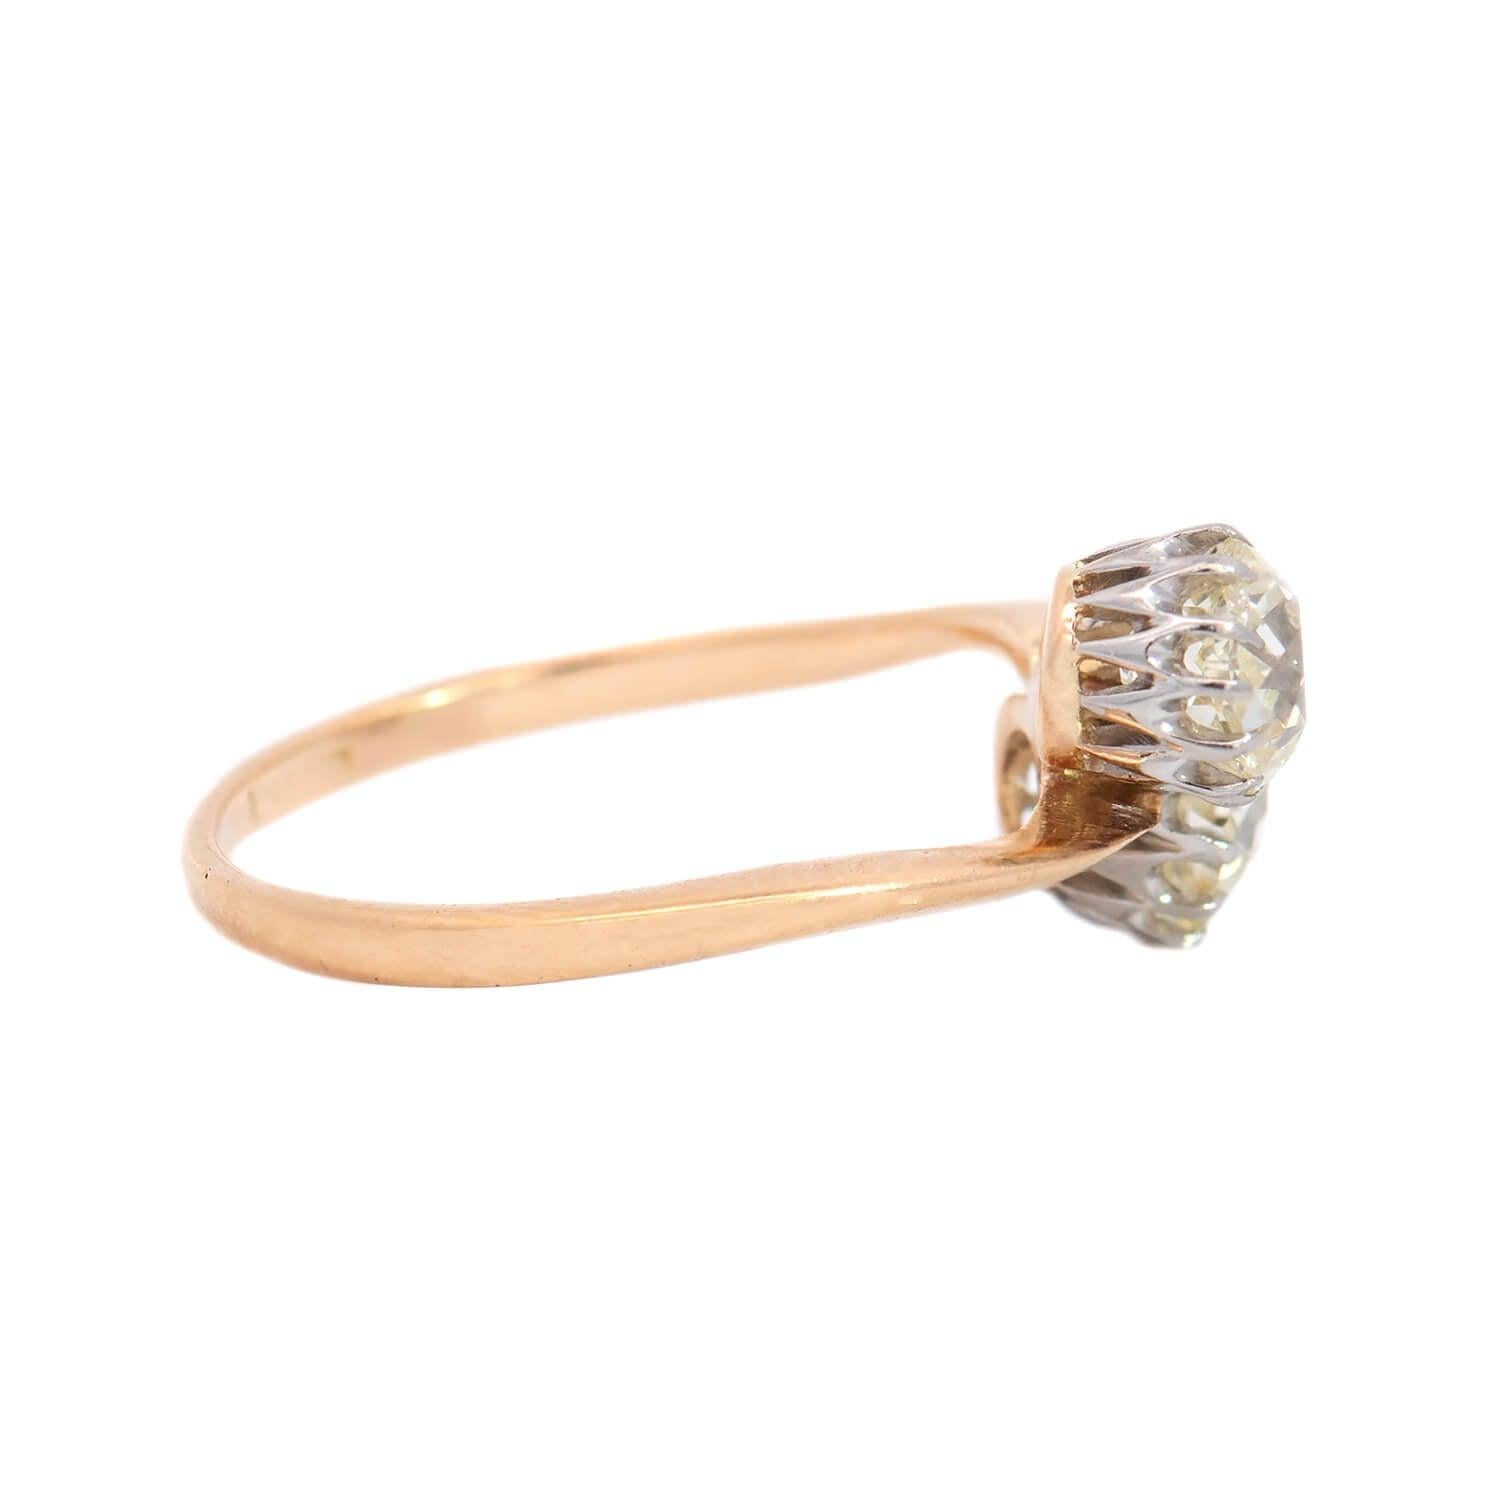 A unique and exquisite diamond bypass ring from the Edwardian (ca1910) era! Crafted in 18k yellow gold with platinum prongs, this piece features two old Mine Cut diamonds nestled together at the center, forming a stylish 